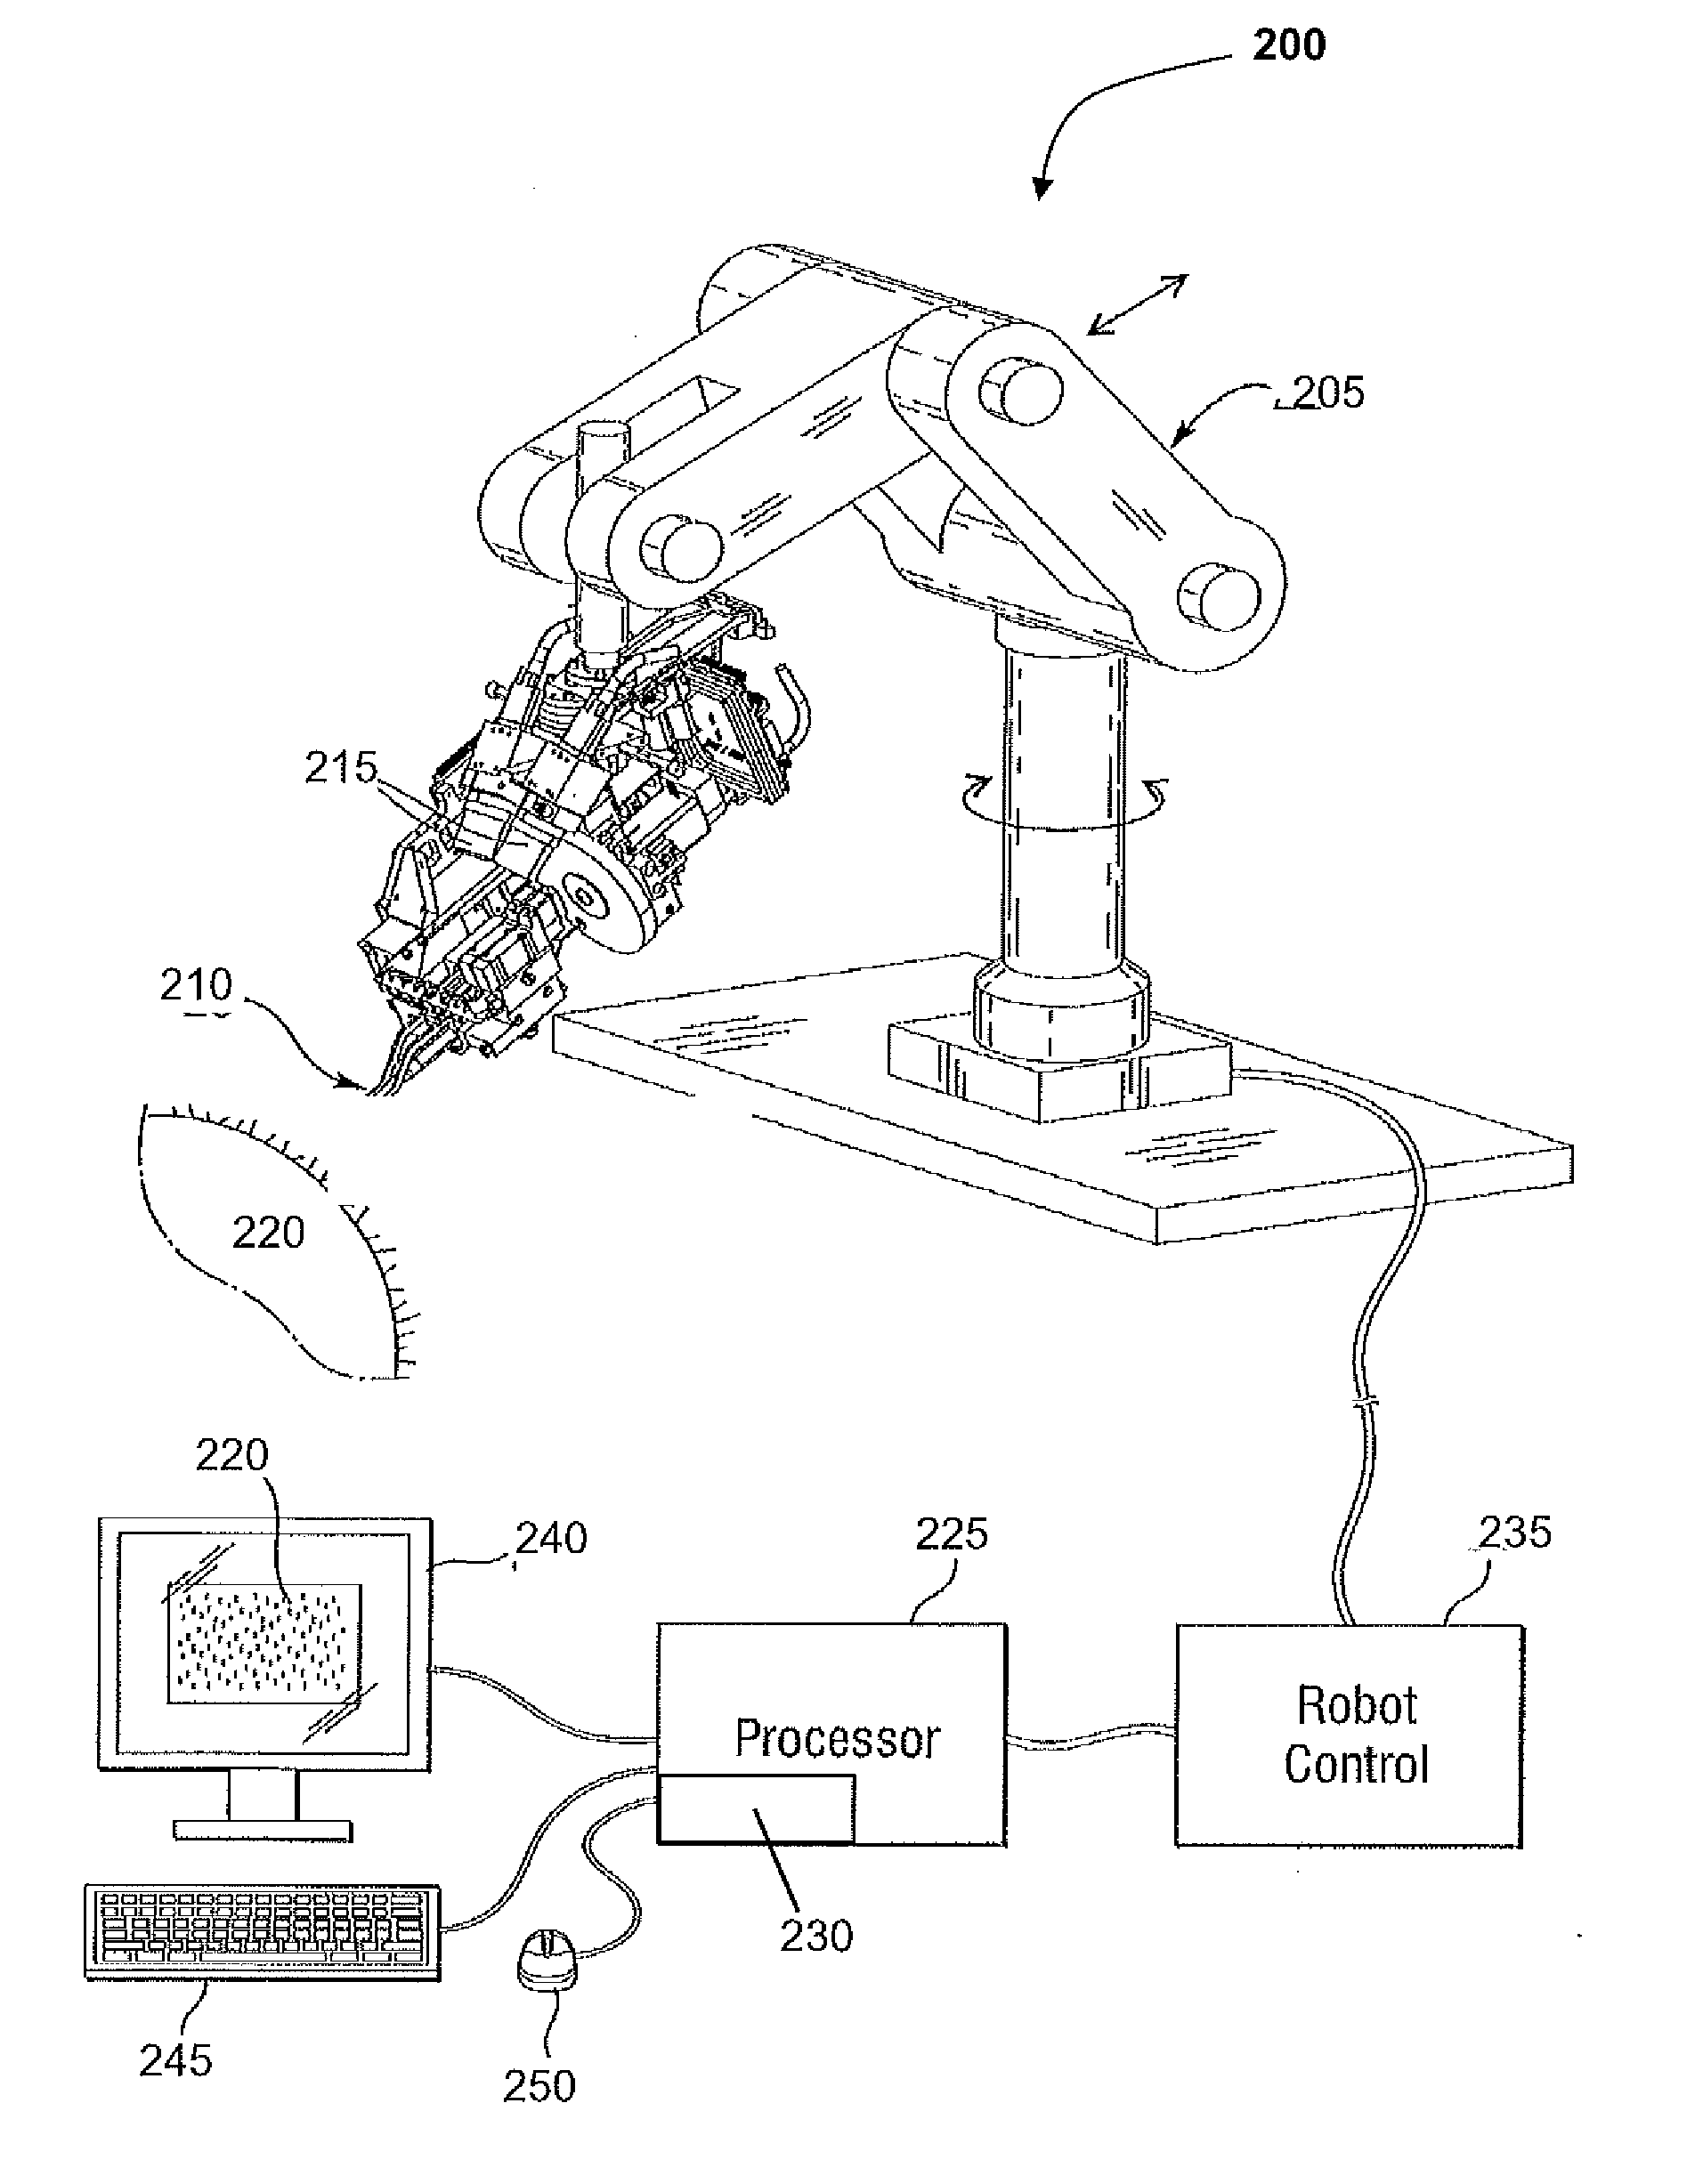 Methods and Systems for Directing Movement of a Tool in Hair Transplantation Procedures